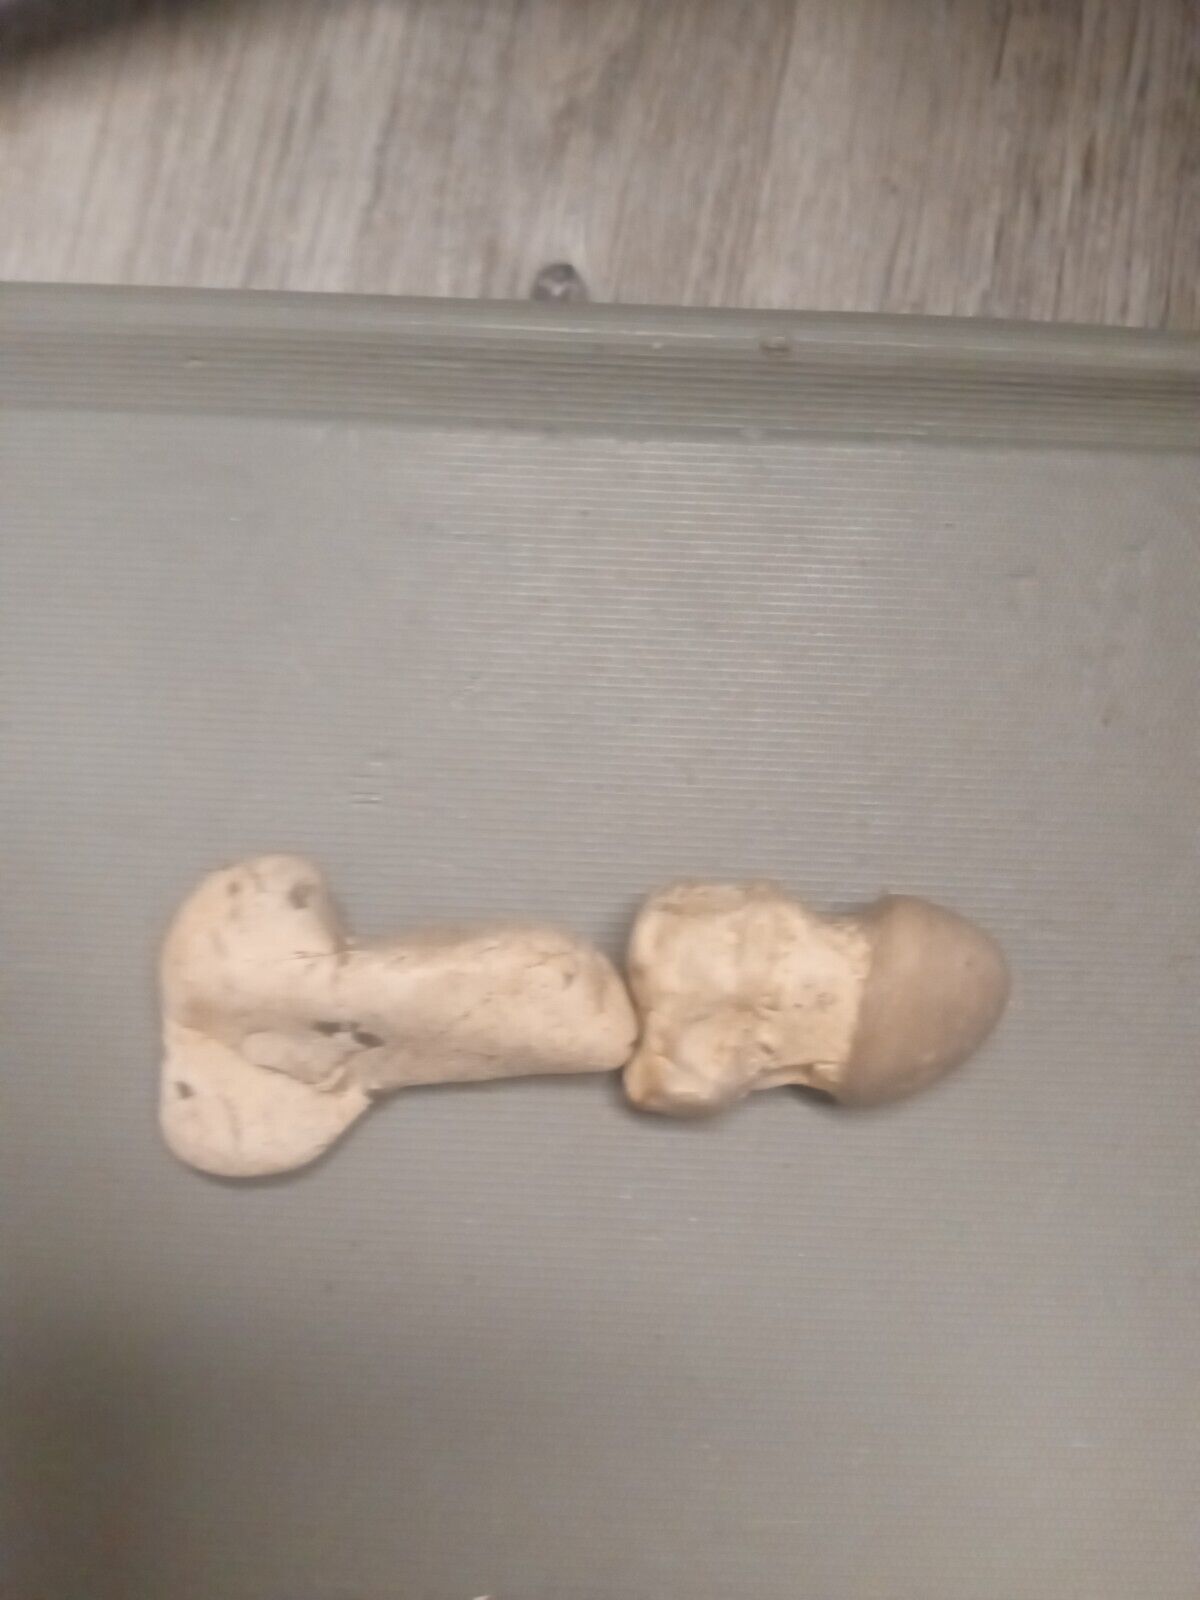 penis shaped, excellent condition, naturally formed no man made touches,